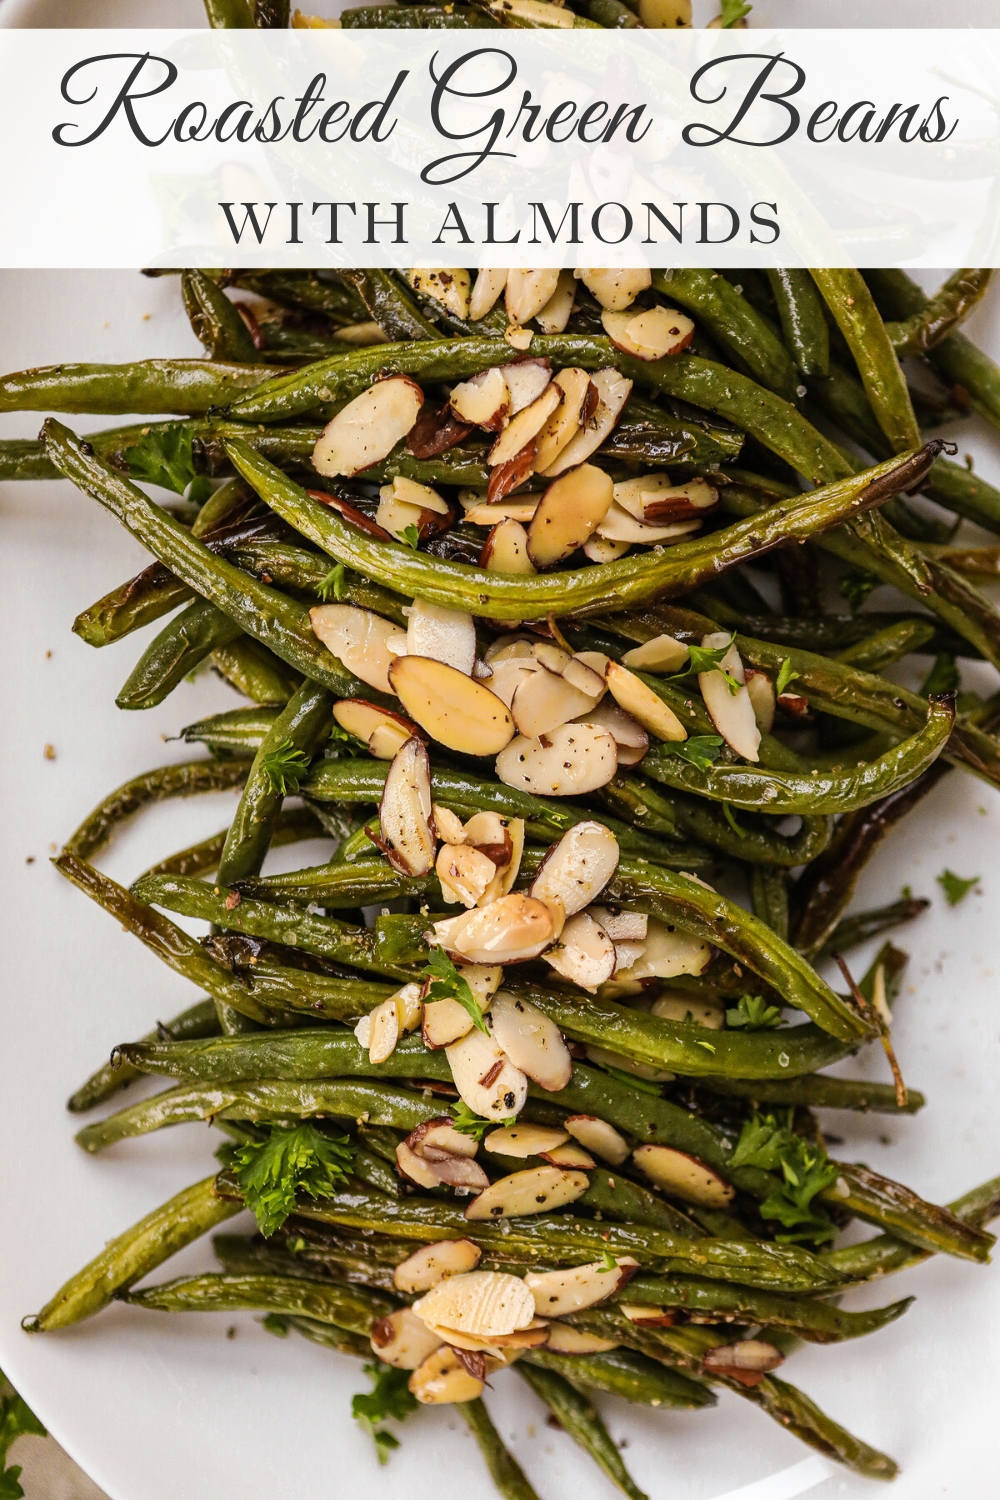 recipe for Green Beans with Almonds